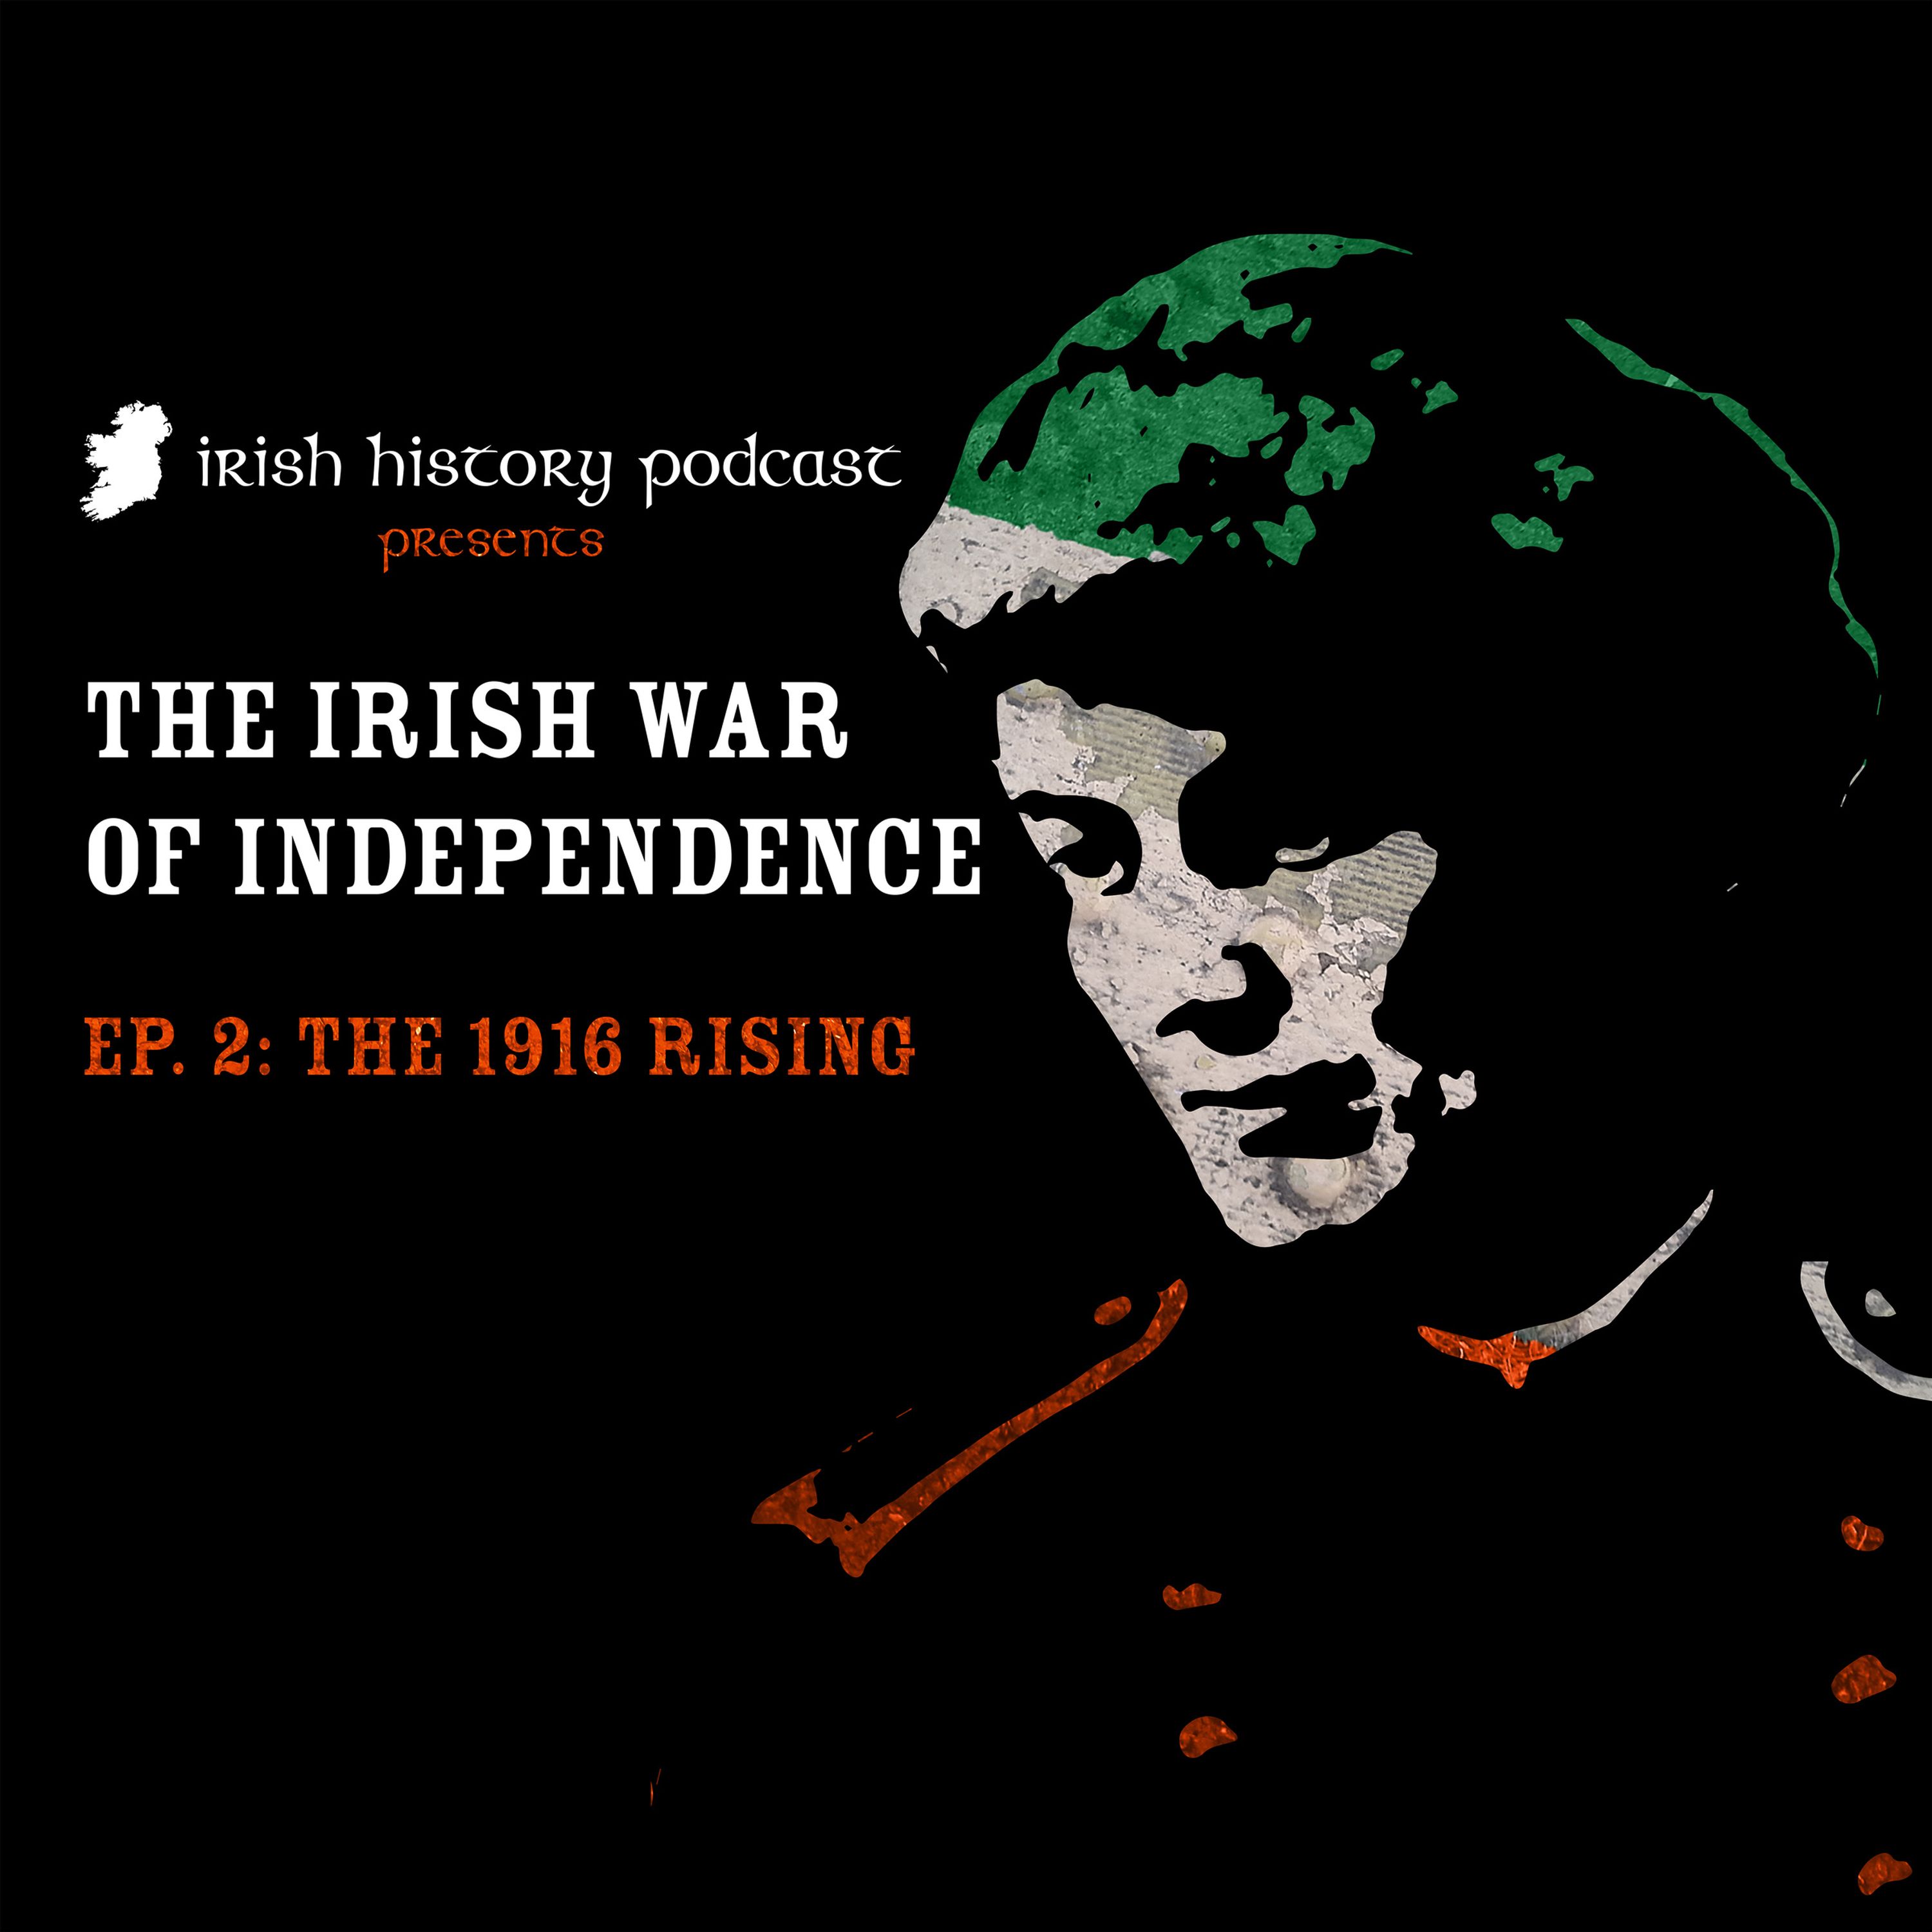 The 1916 Rising (The War of Independence Part II)